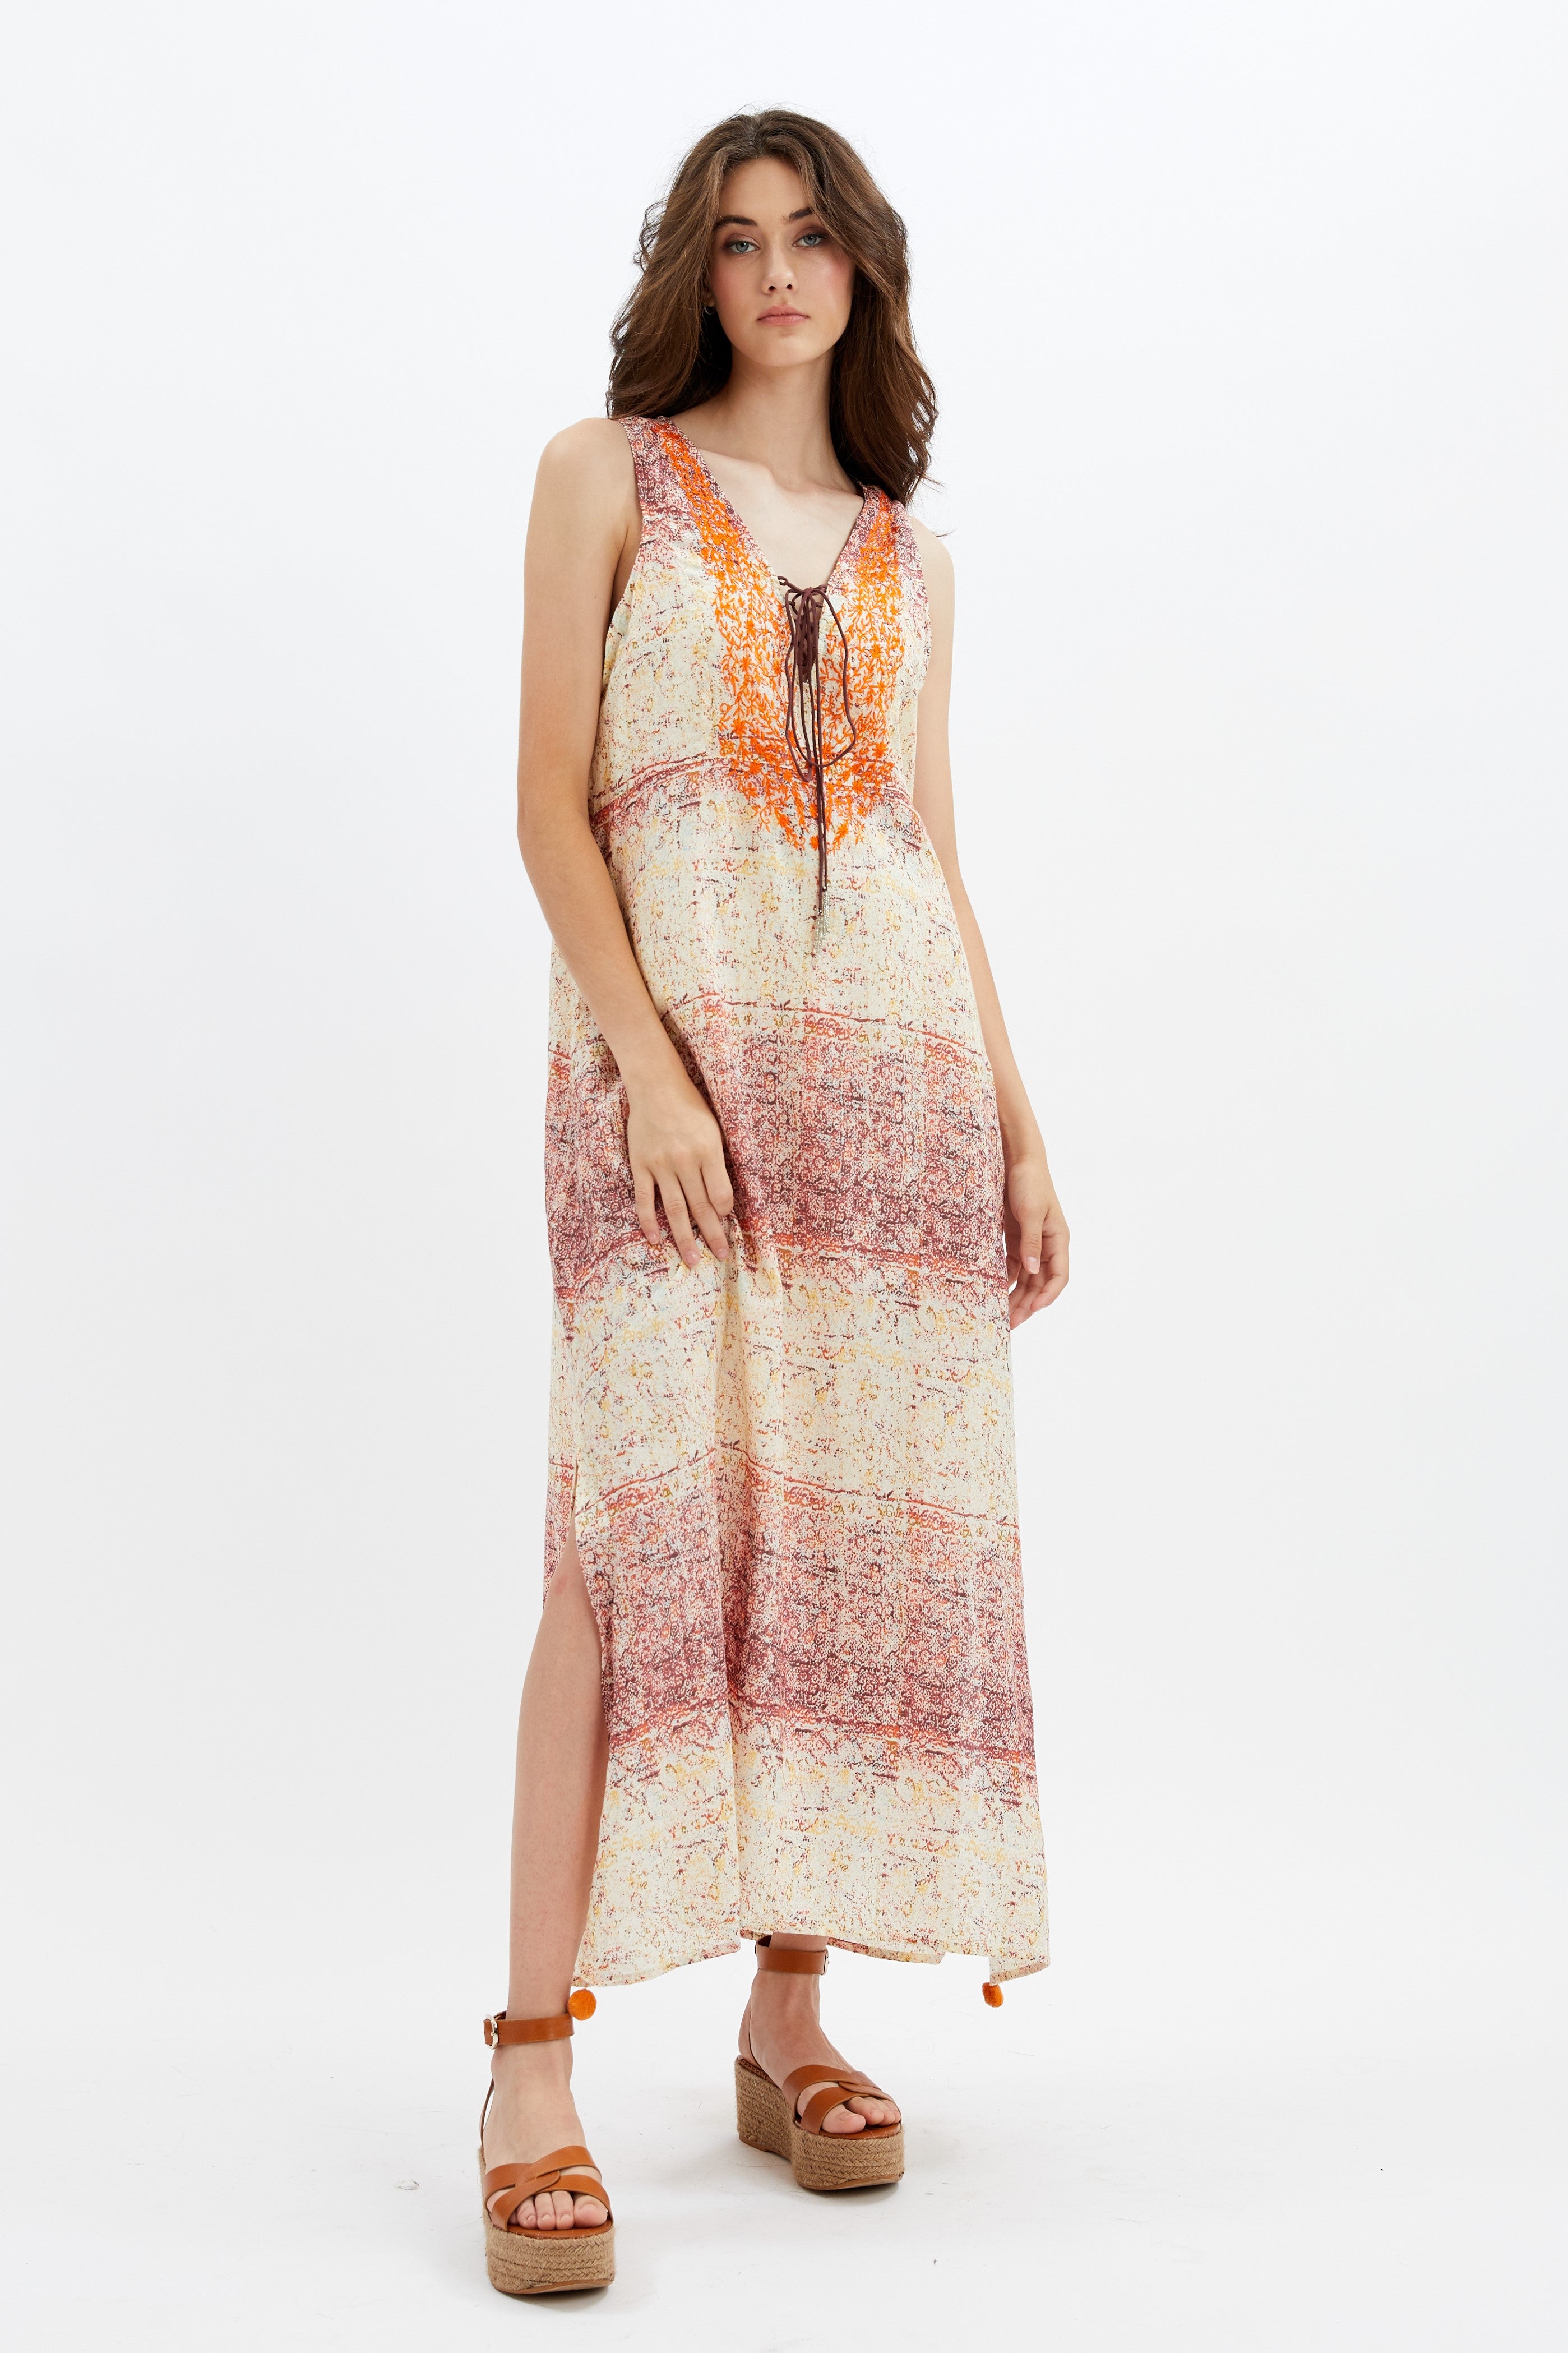 PEYTON | Sleveless Maxi Dress With Tie Up Front & EMB